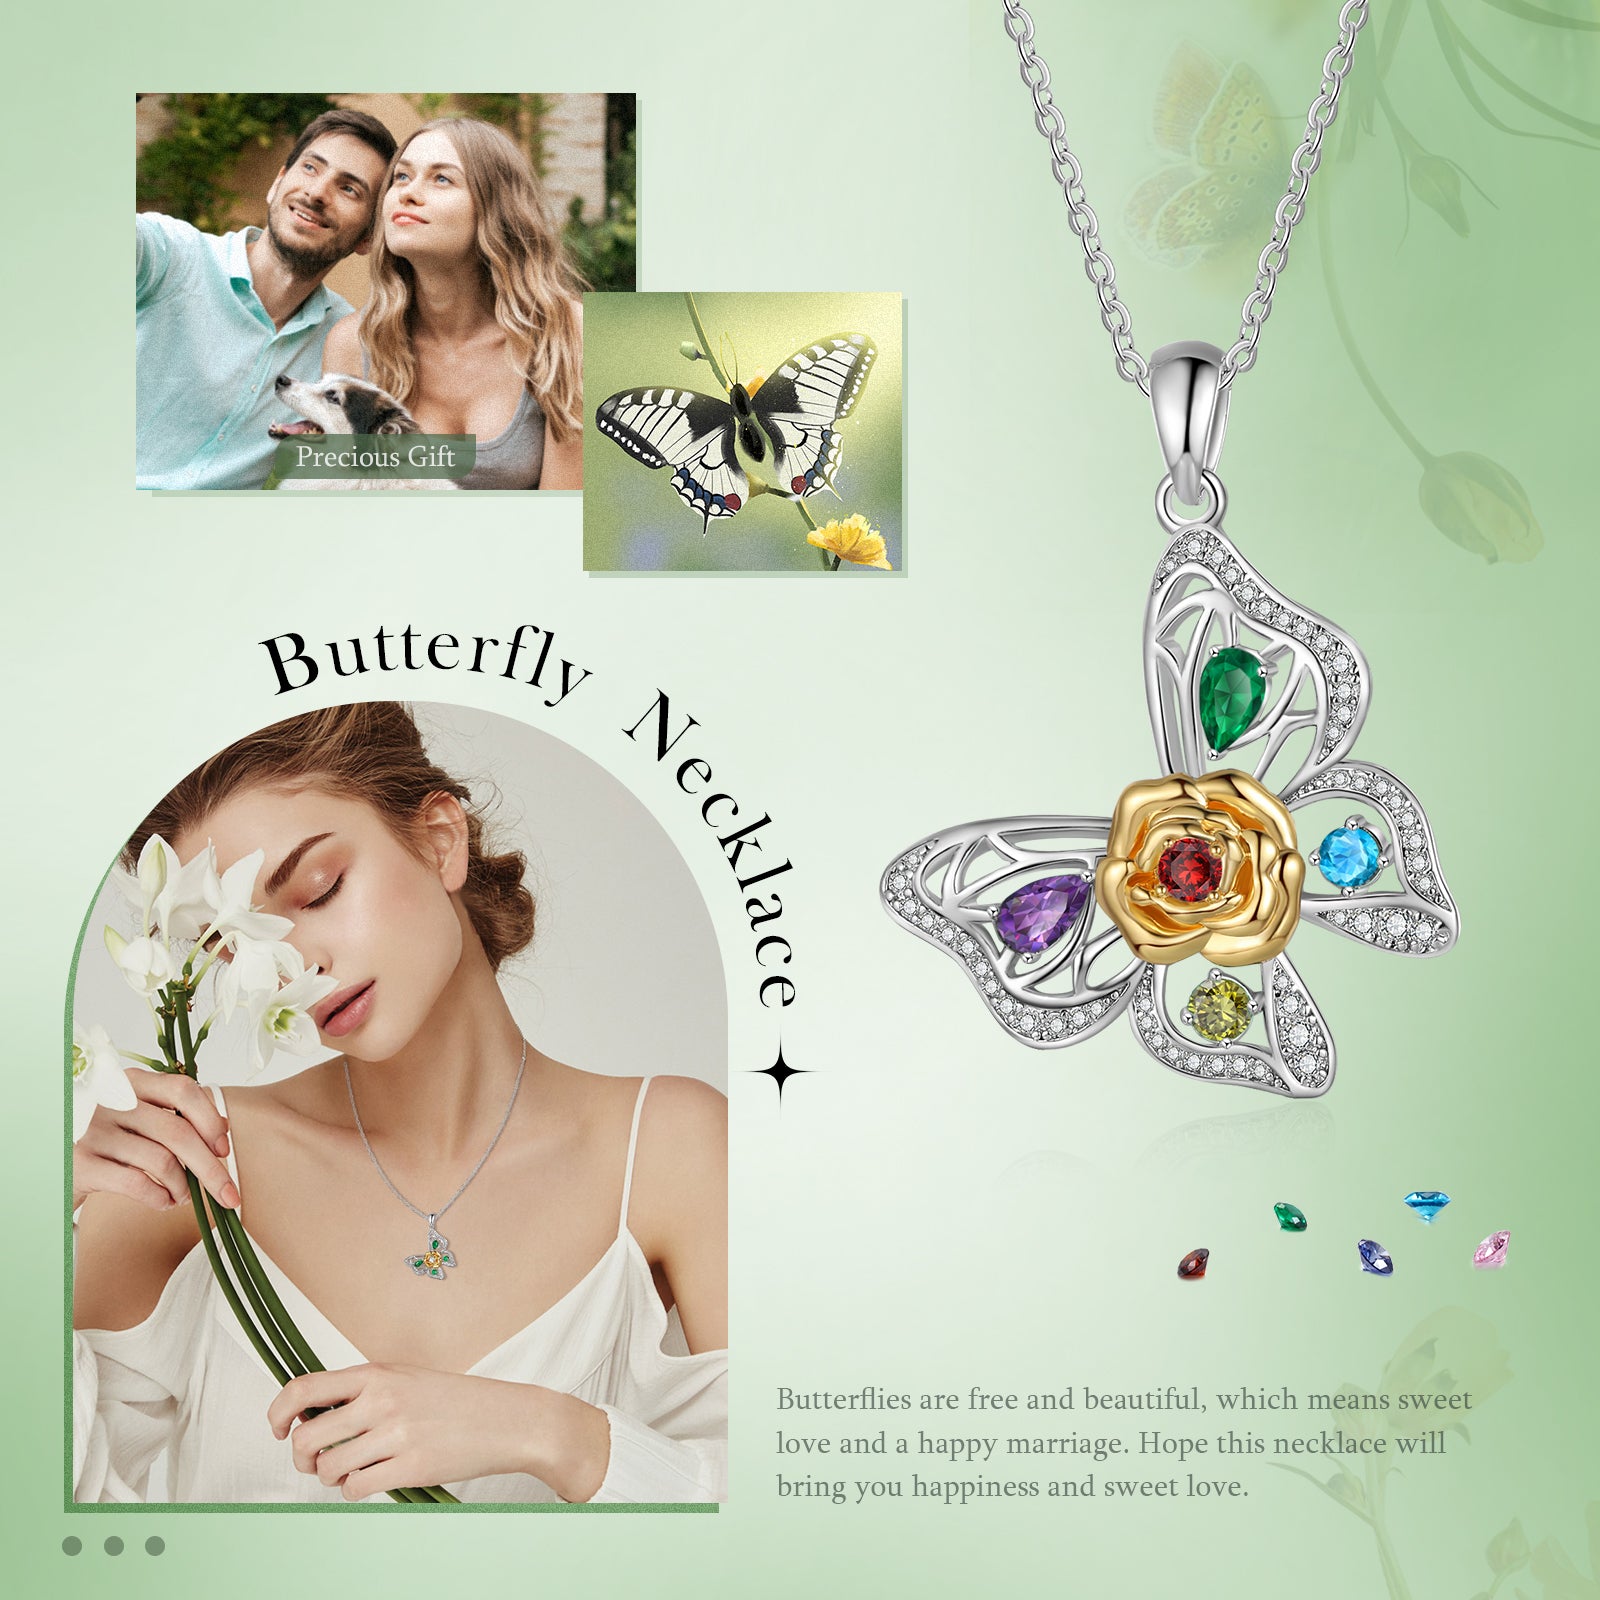 Personalised 925 Sterling Silver Butterfly Birthstone Necklace and image of couple and a girl with flower